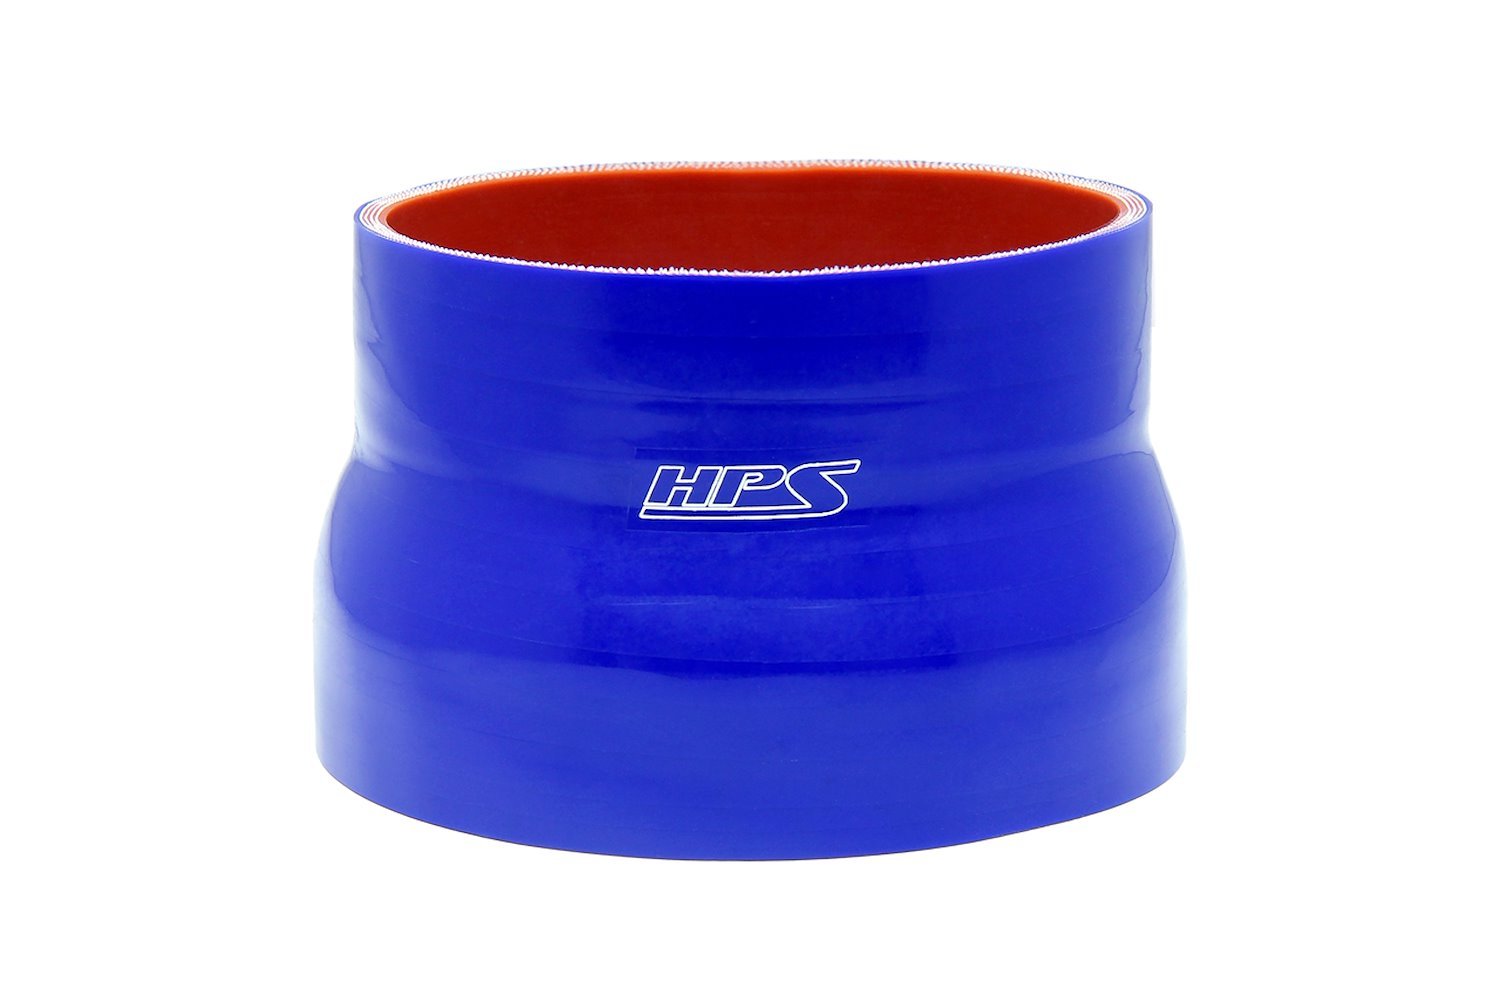 HTSR-375-450-BLUE Silicone Reducer Hose, High-Temp 4-Ply Reinforced, 3-3/4 in. - 4-1/2 in. ID, 3 in. Long, Blue